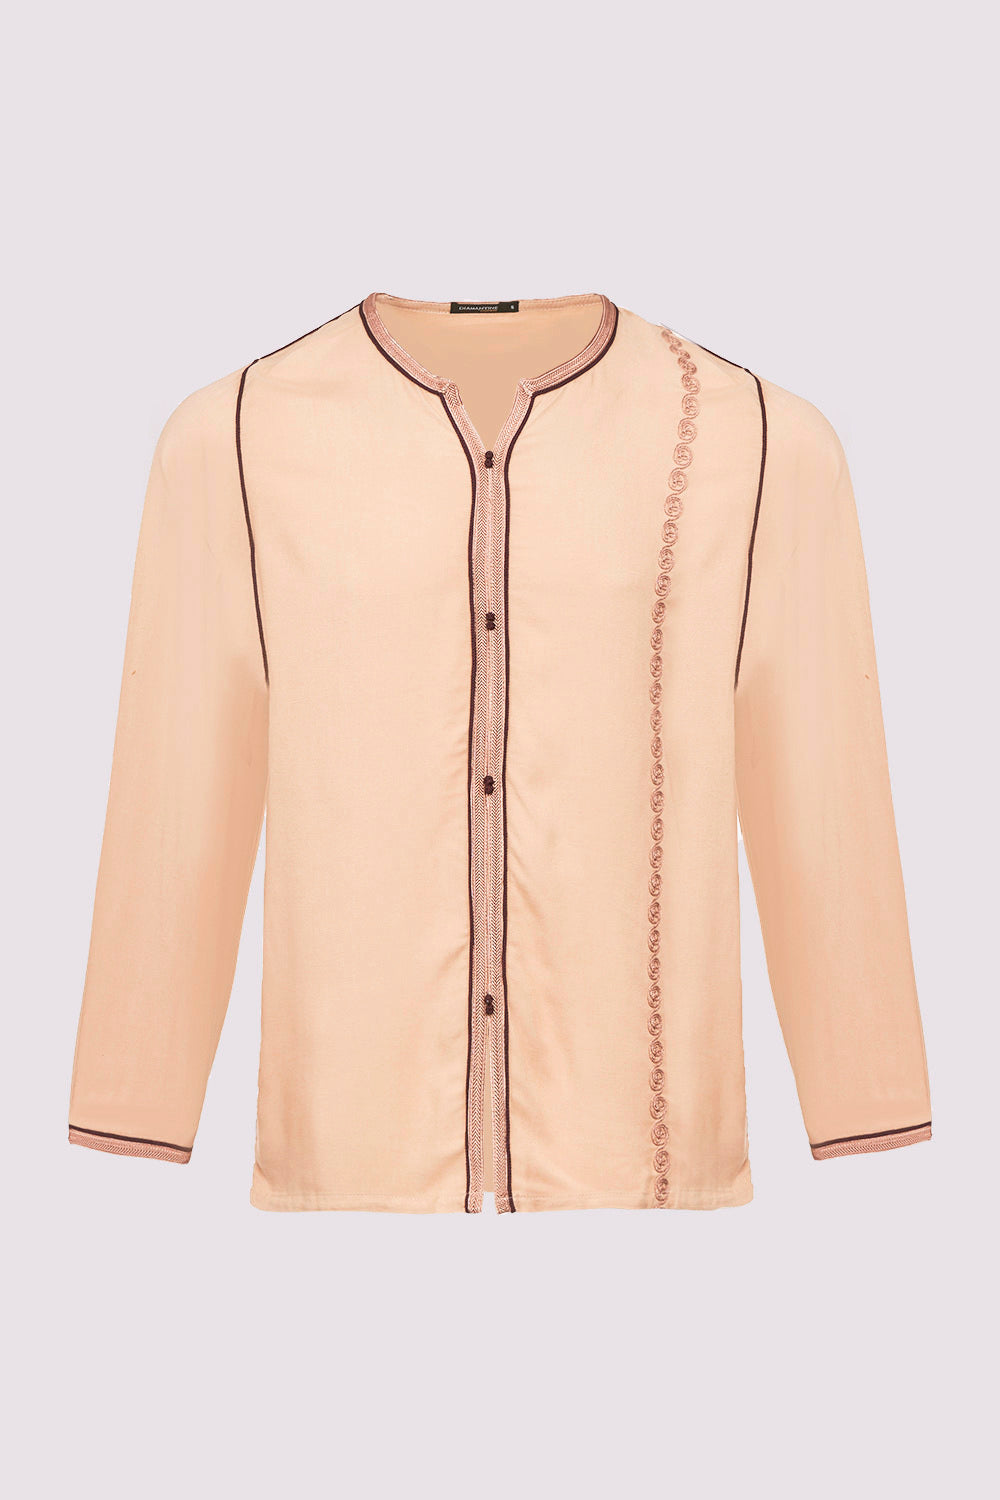 Houssni Embroidered Collarless Men's Button-Up Shirt in Beige